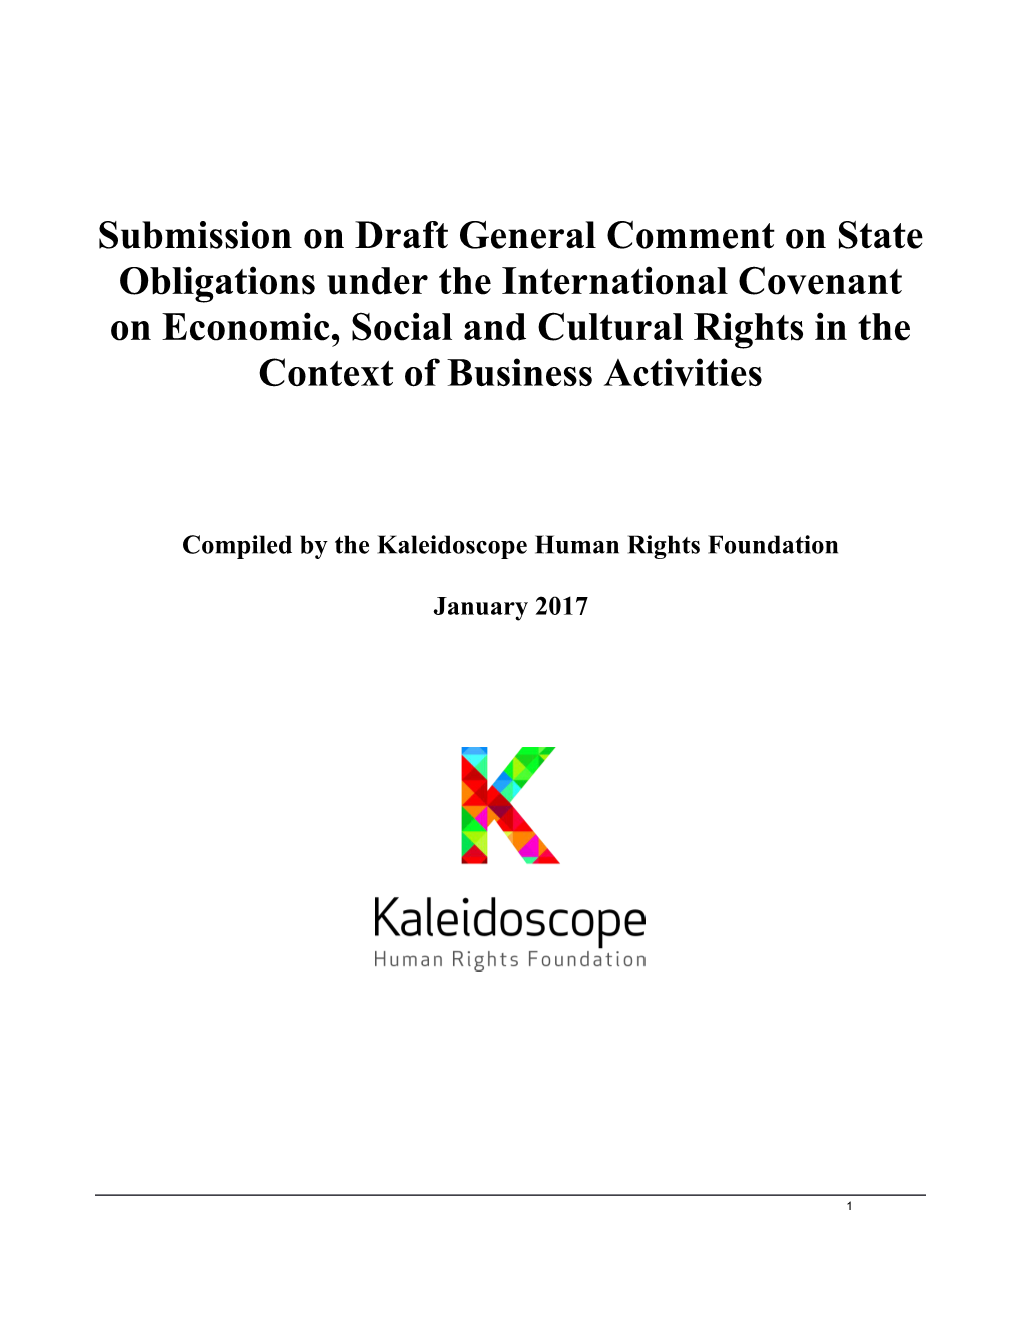 Compiled by the Kaleidoscope Human Rights Foundation